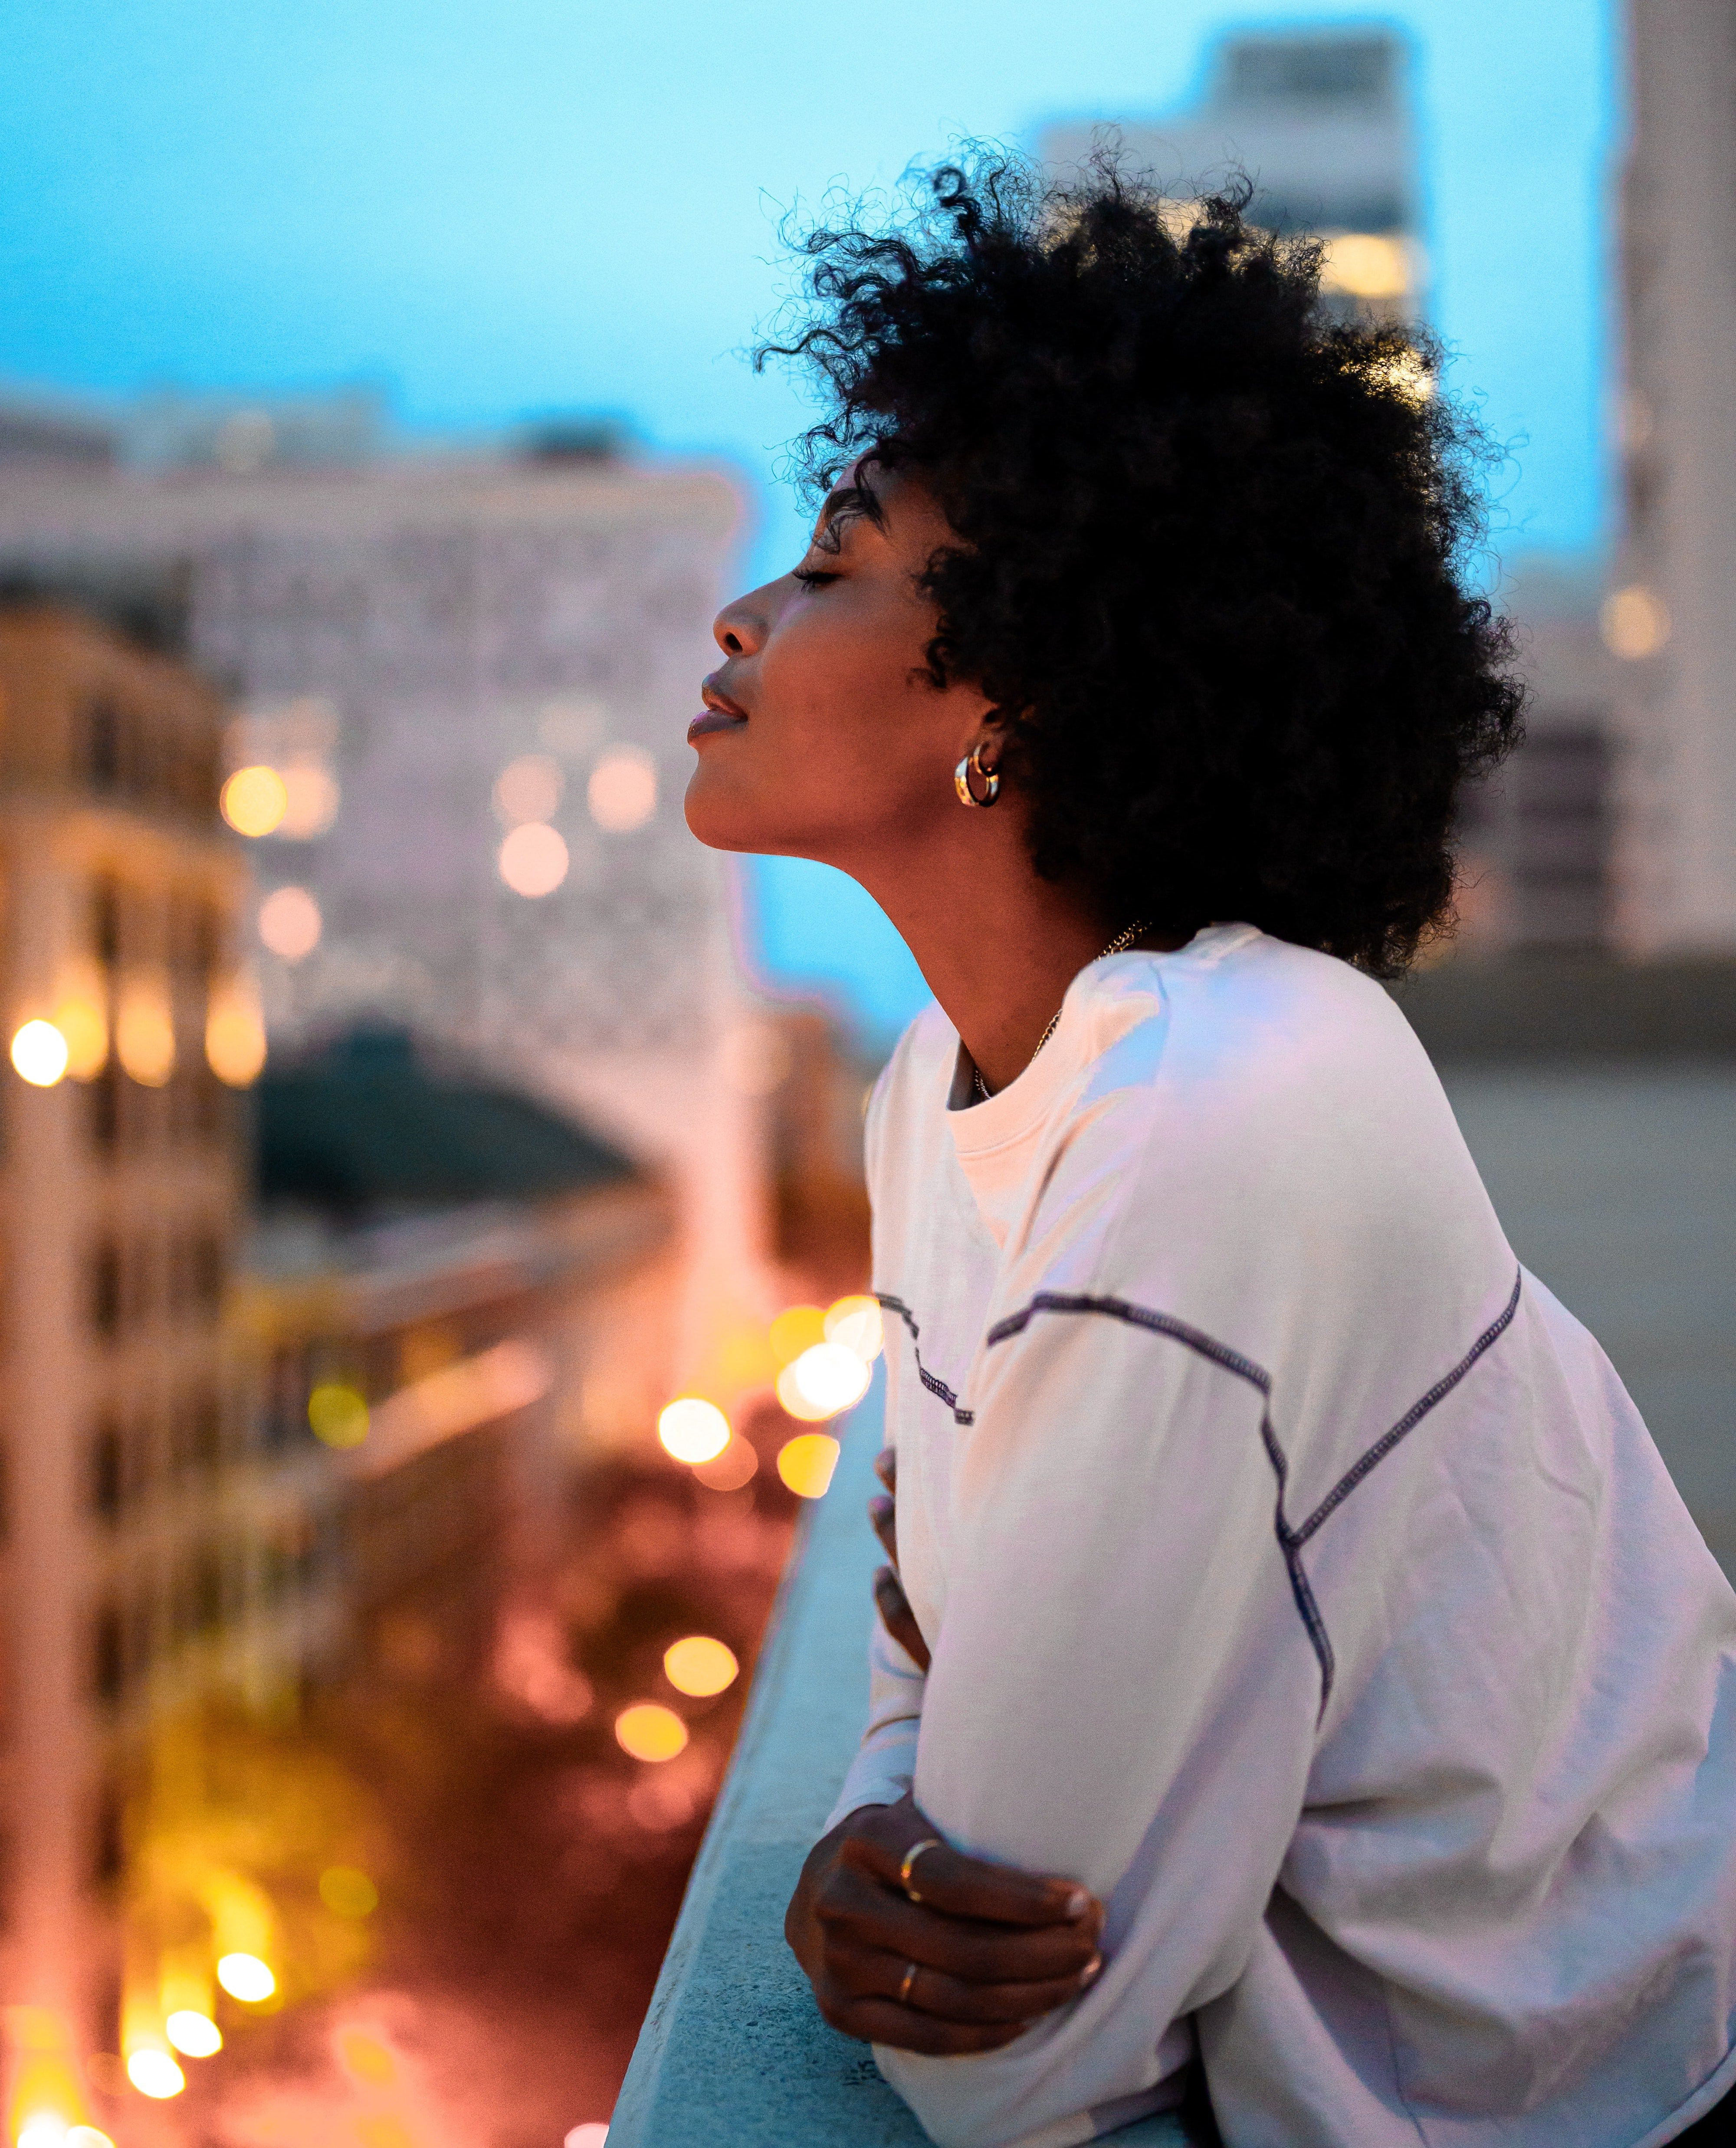 A Black woman relaxing with her eyes closed as she leans over rooftop ledge.